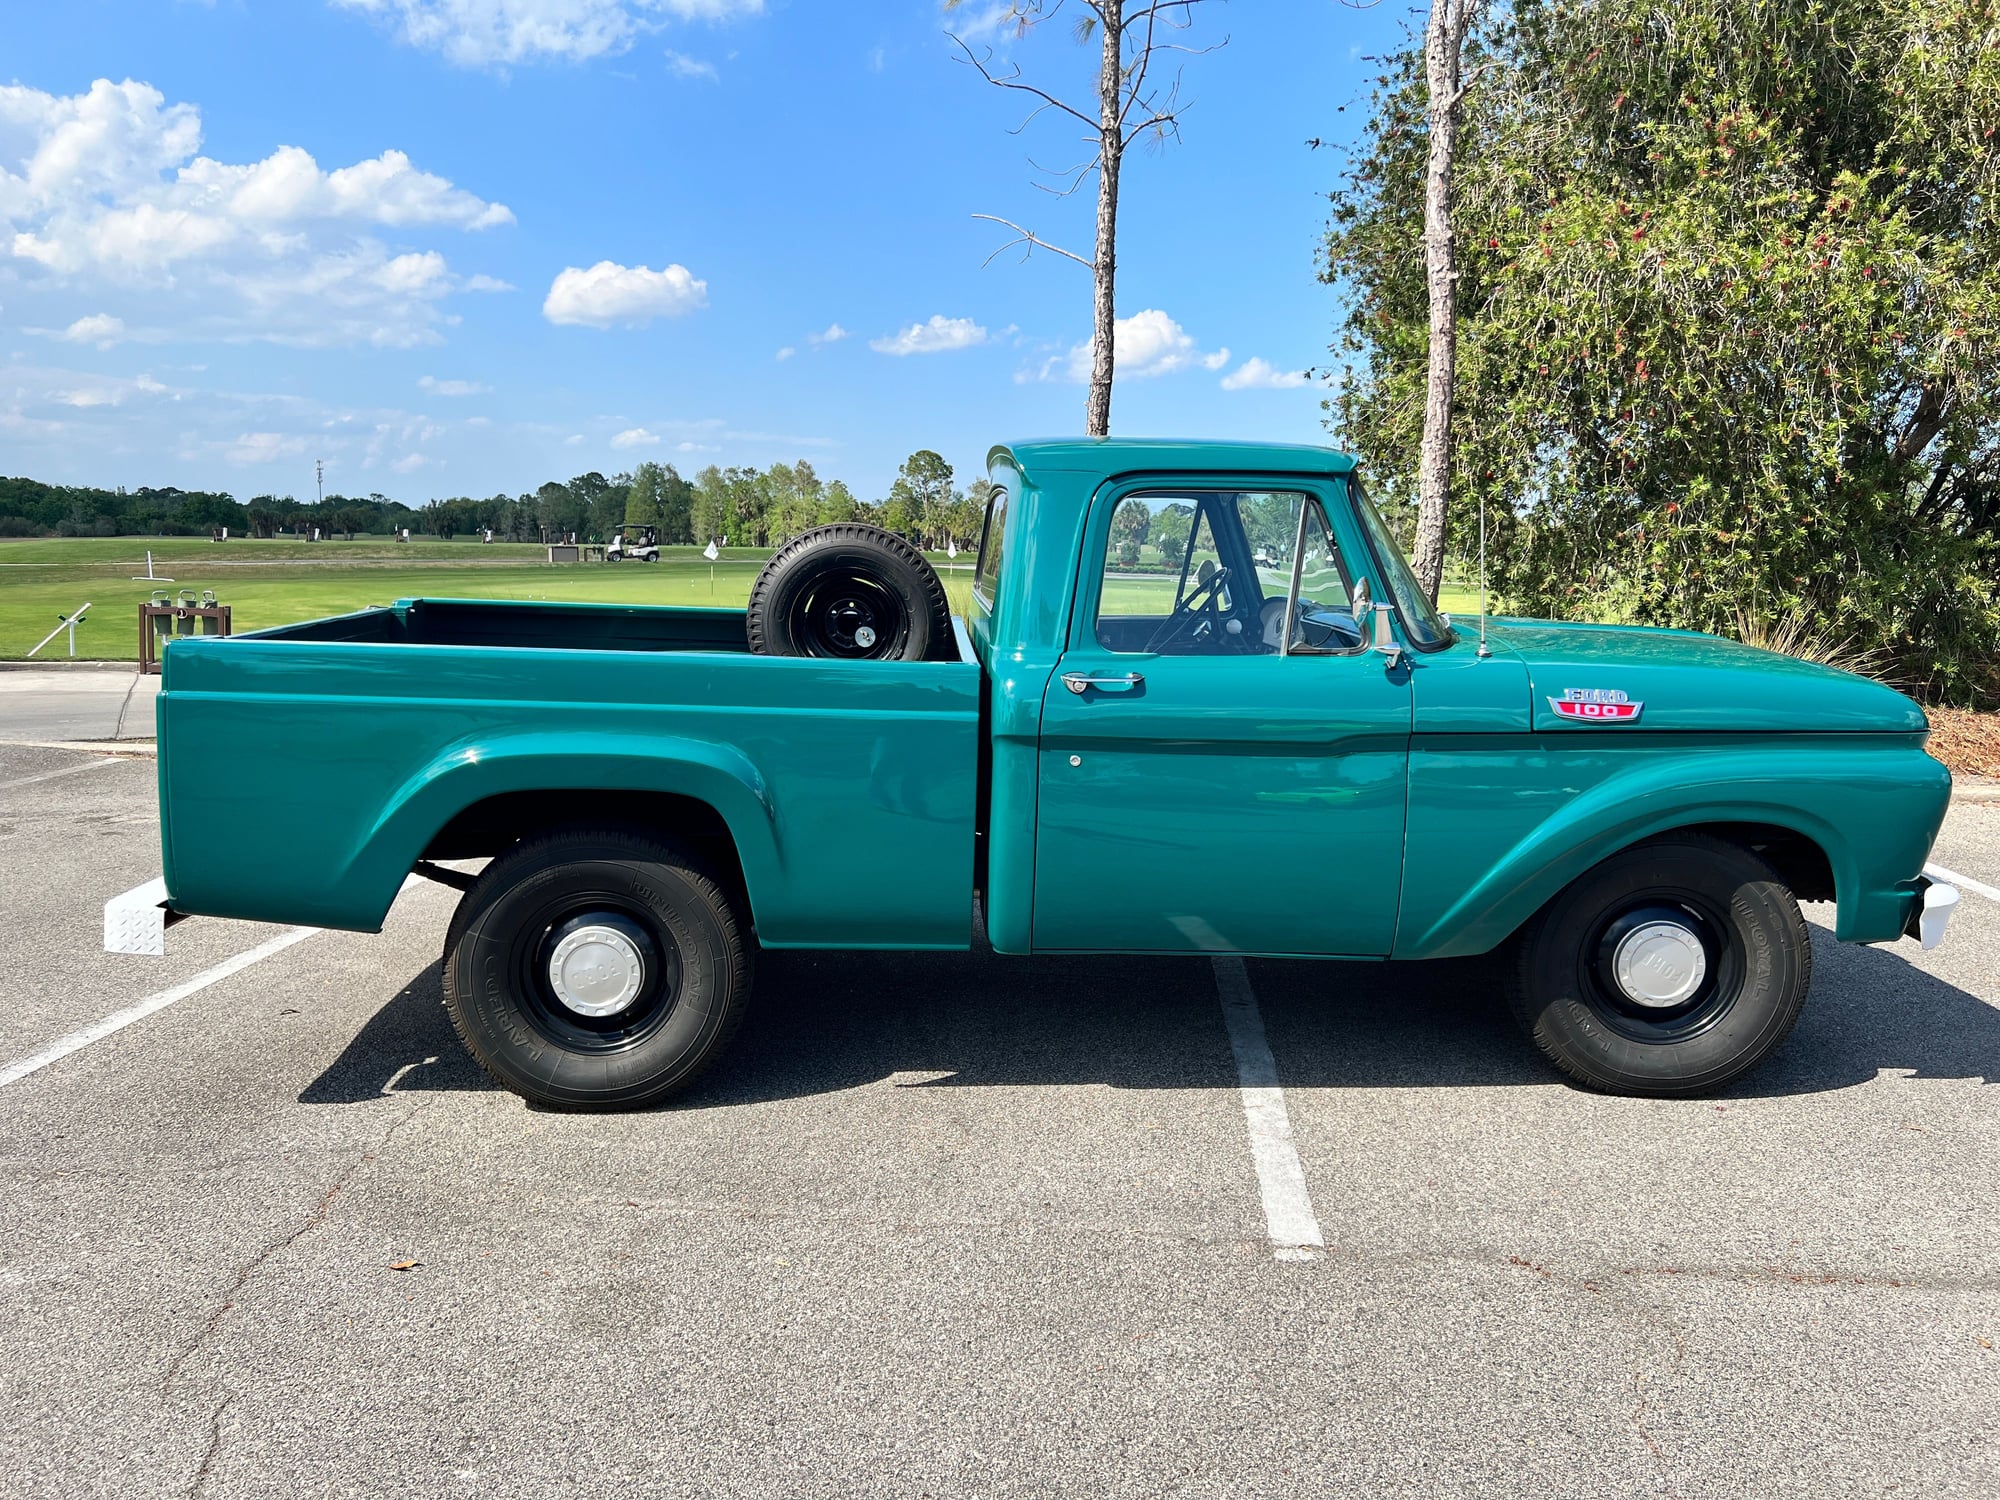 1963 Ford F-100 - 1963 Ford F-100 4-Speed Comprehensive Restoration done prior to May 2019. - Used - VIN F10CR351156 - 103,482 Miles - 8 cyl - 2WD - Manual - Truck - Other - Maitland, FL 32751, United States